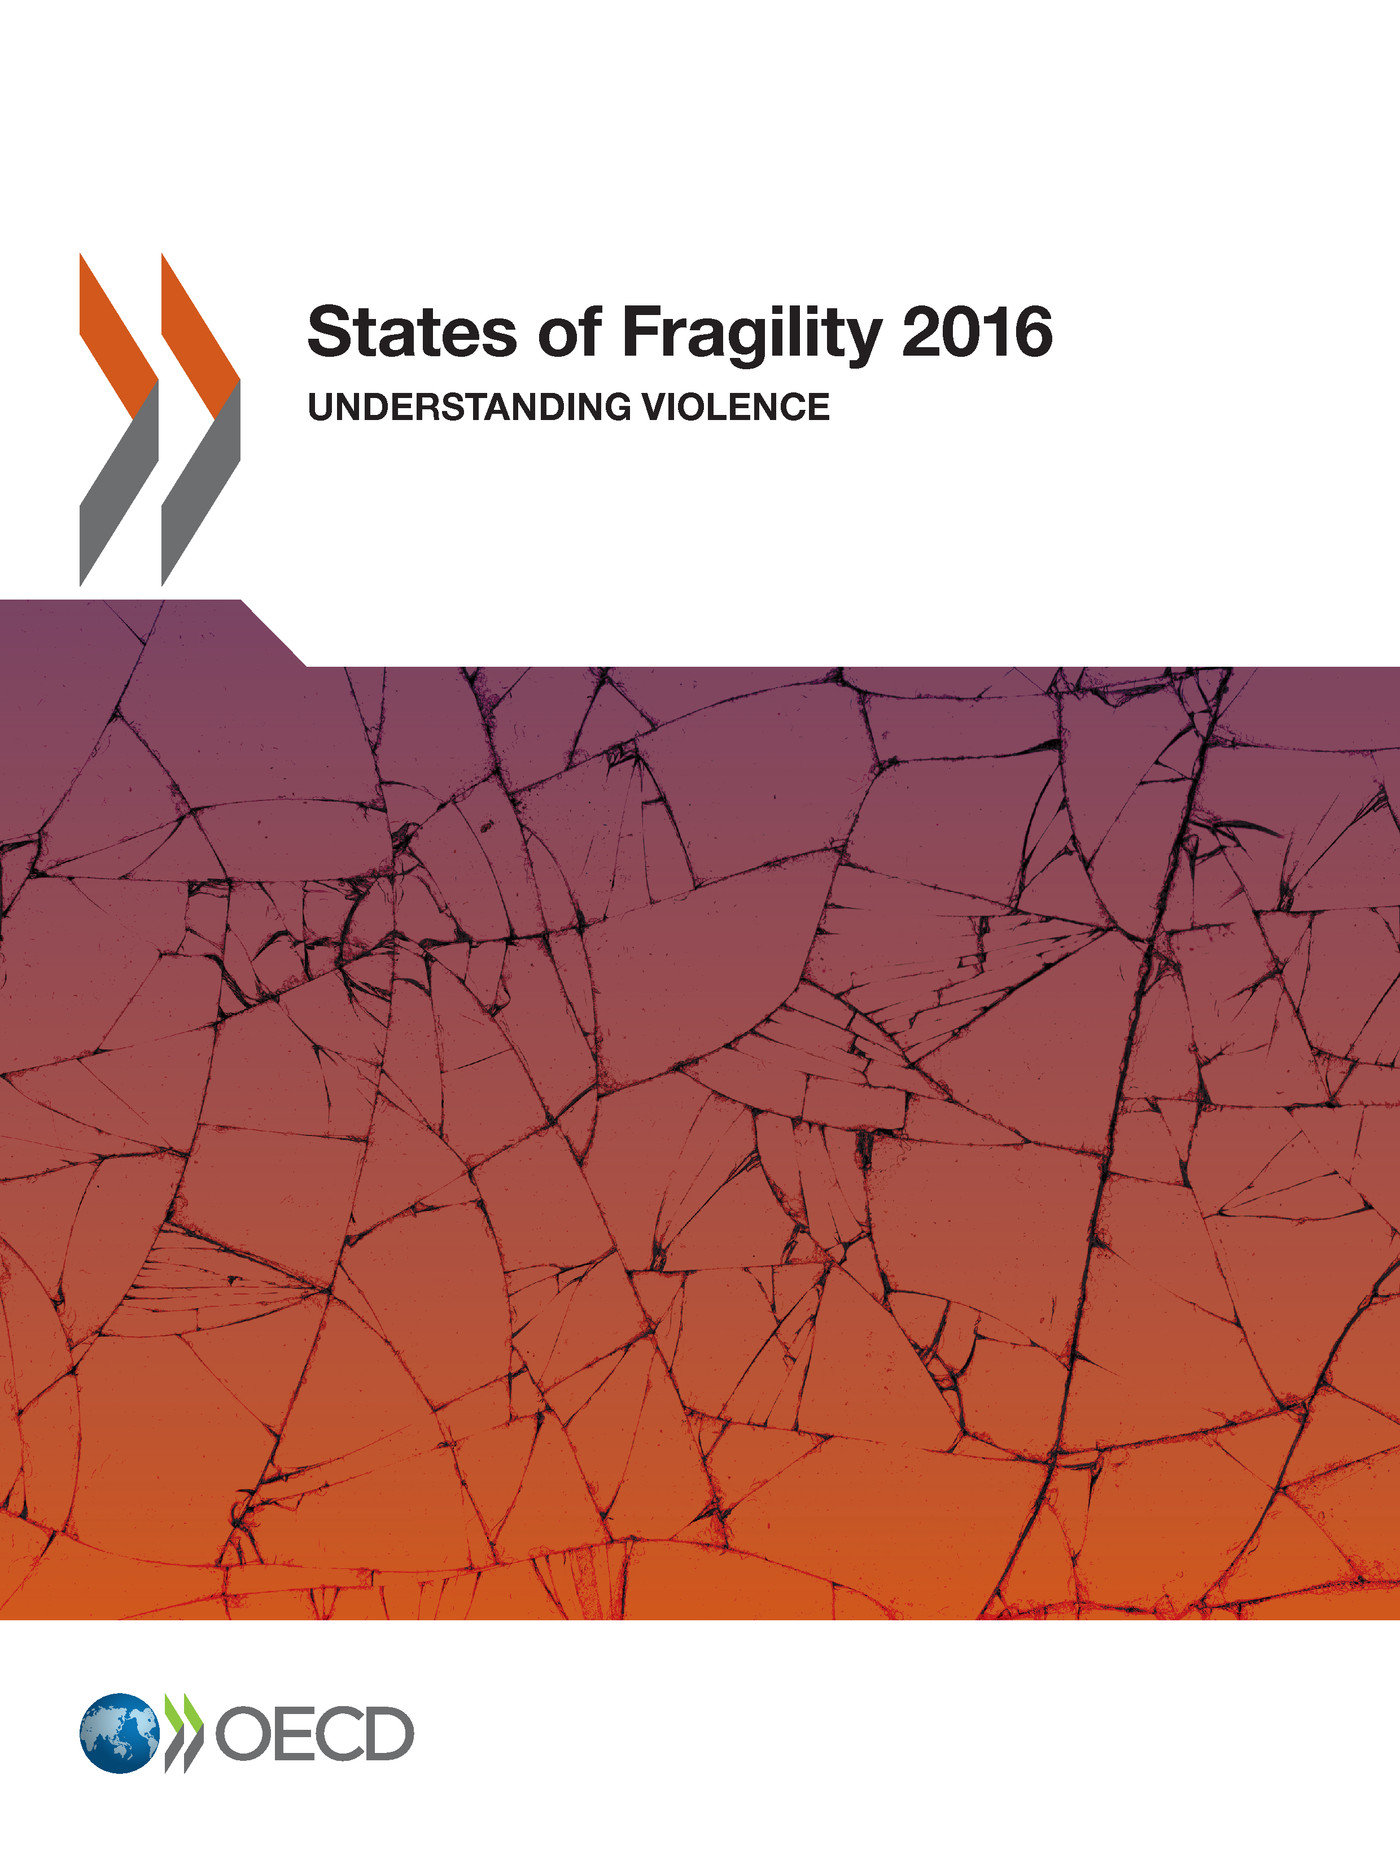 States of Fragility 2016 -  Collectif - OCDE / OECD